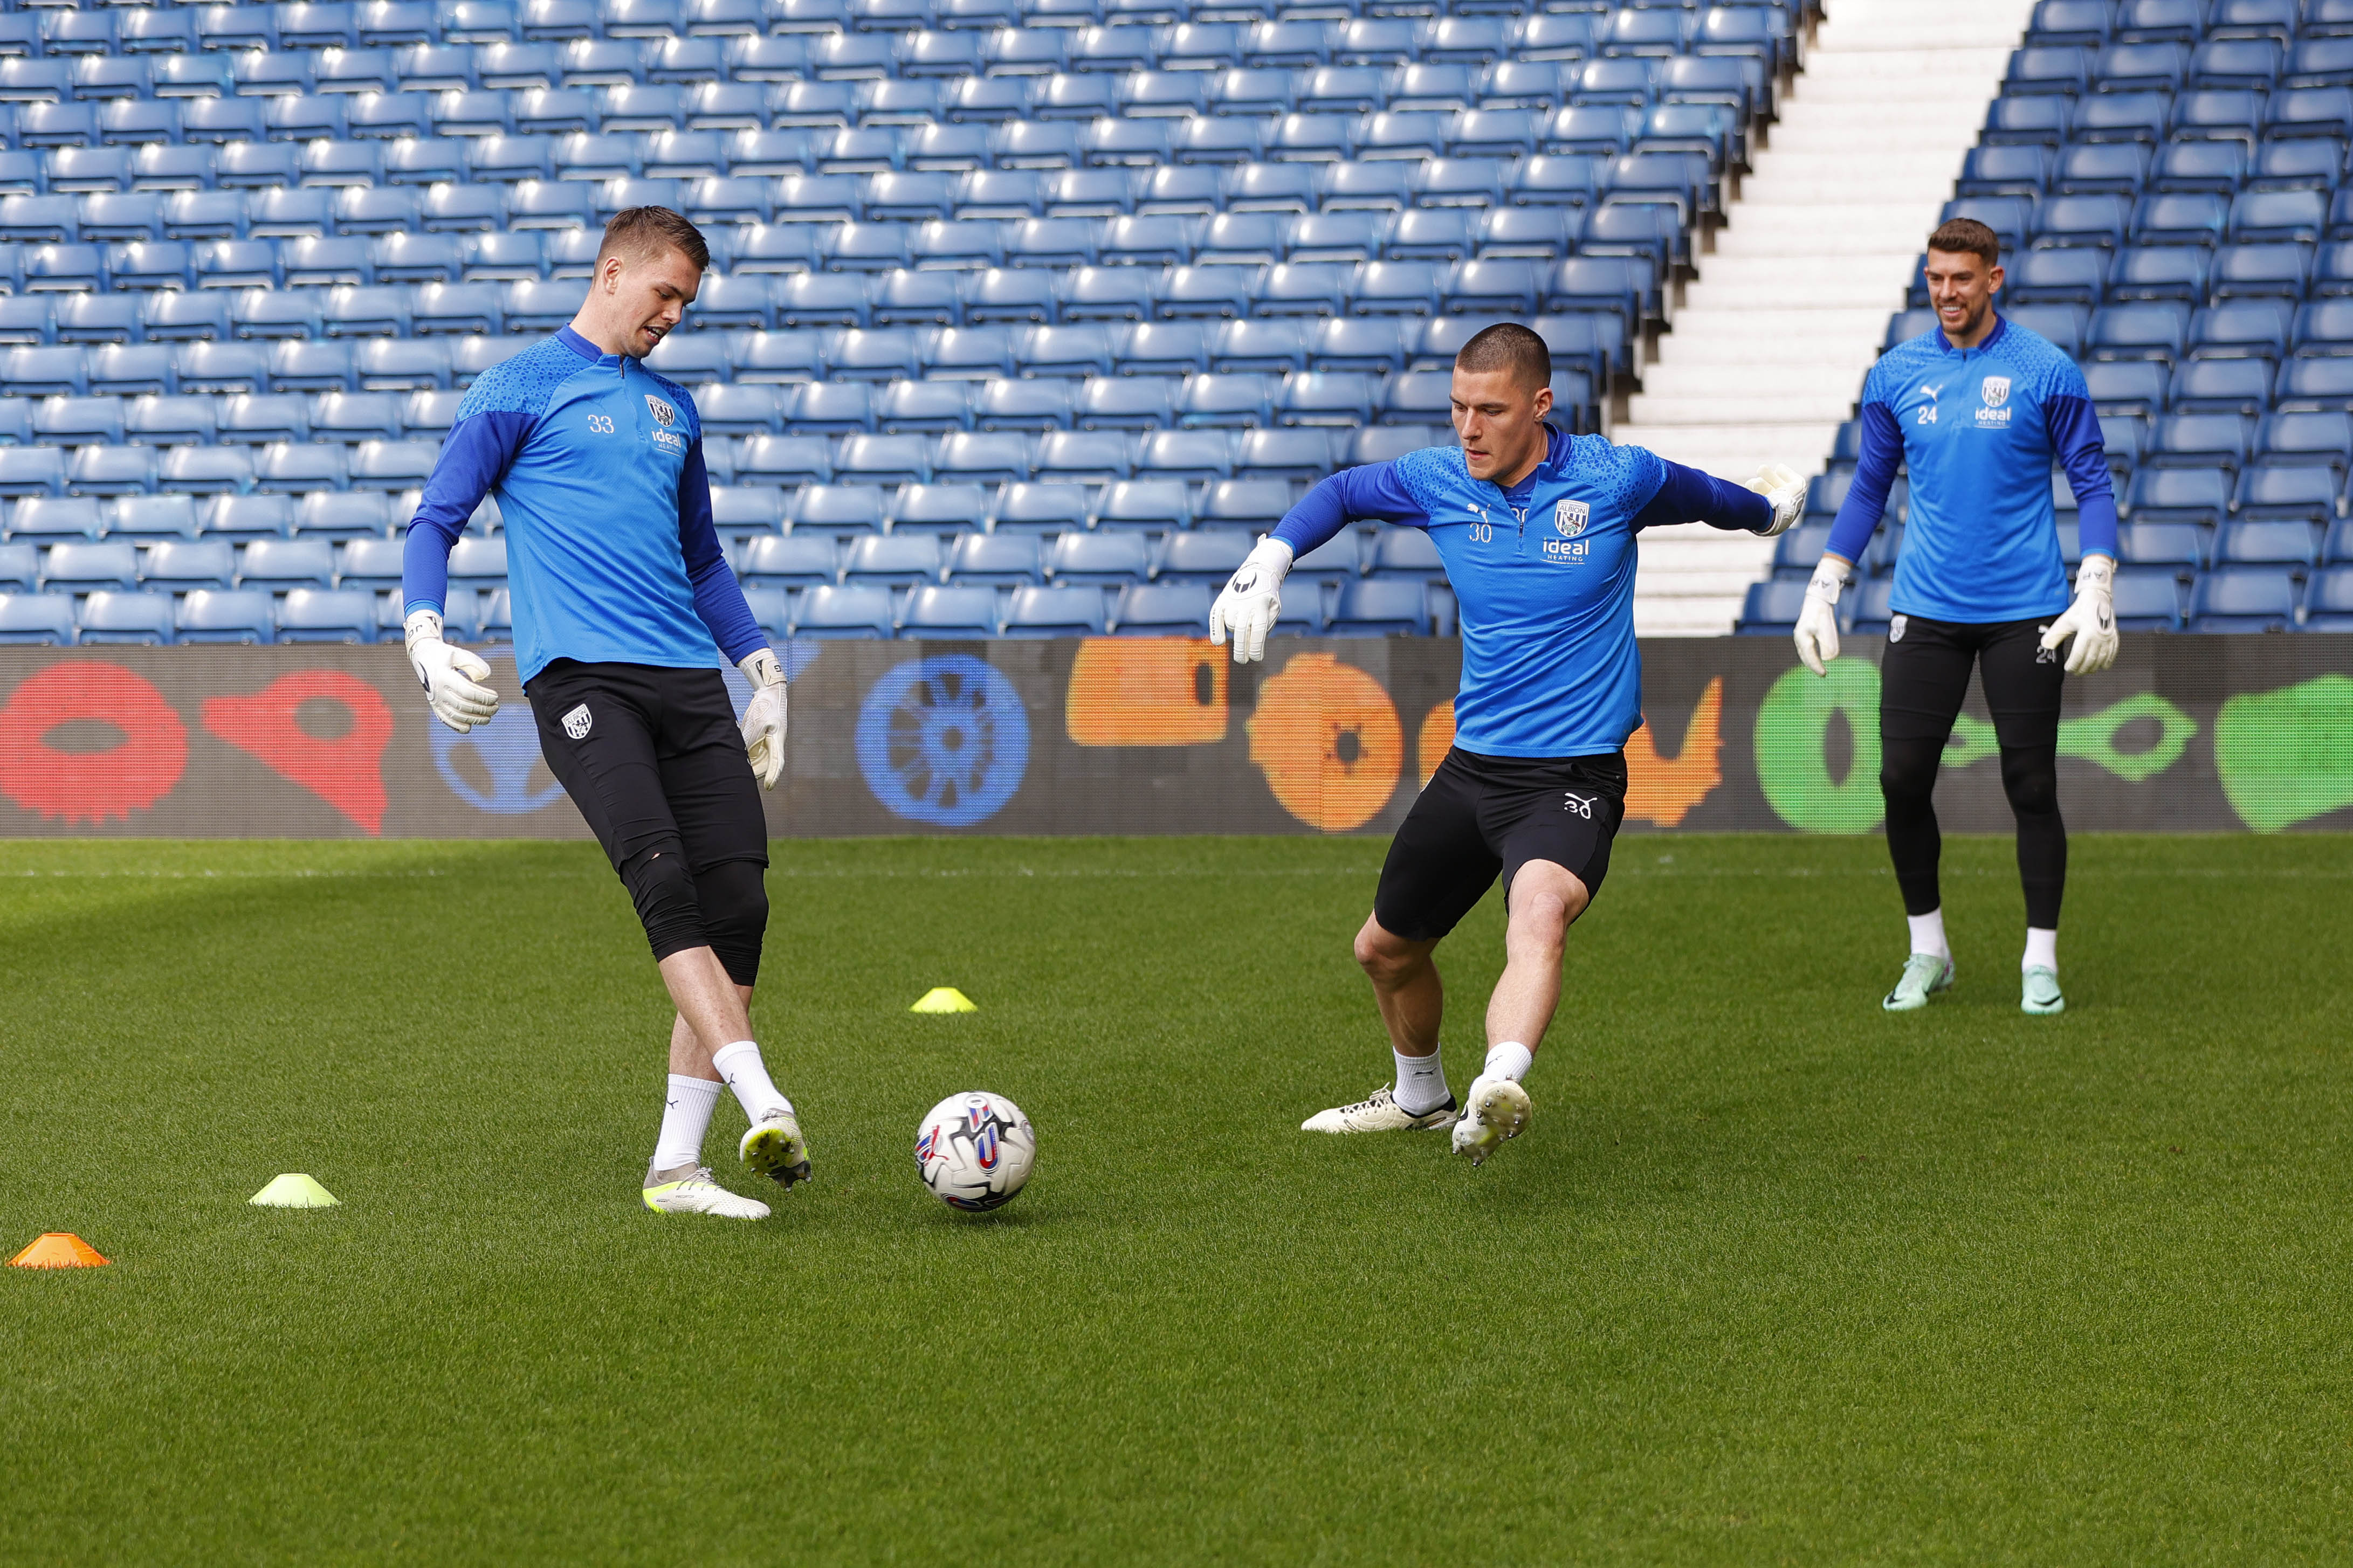 Albion goalkeepers playing a passing game on the pitch at The Hawthorns during a training session